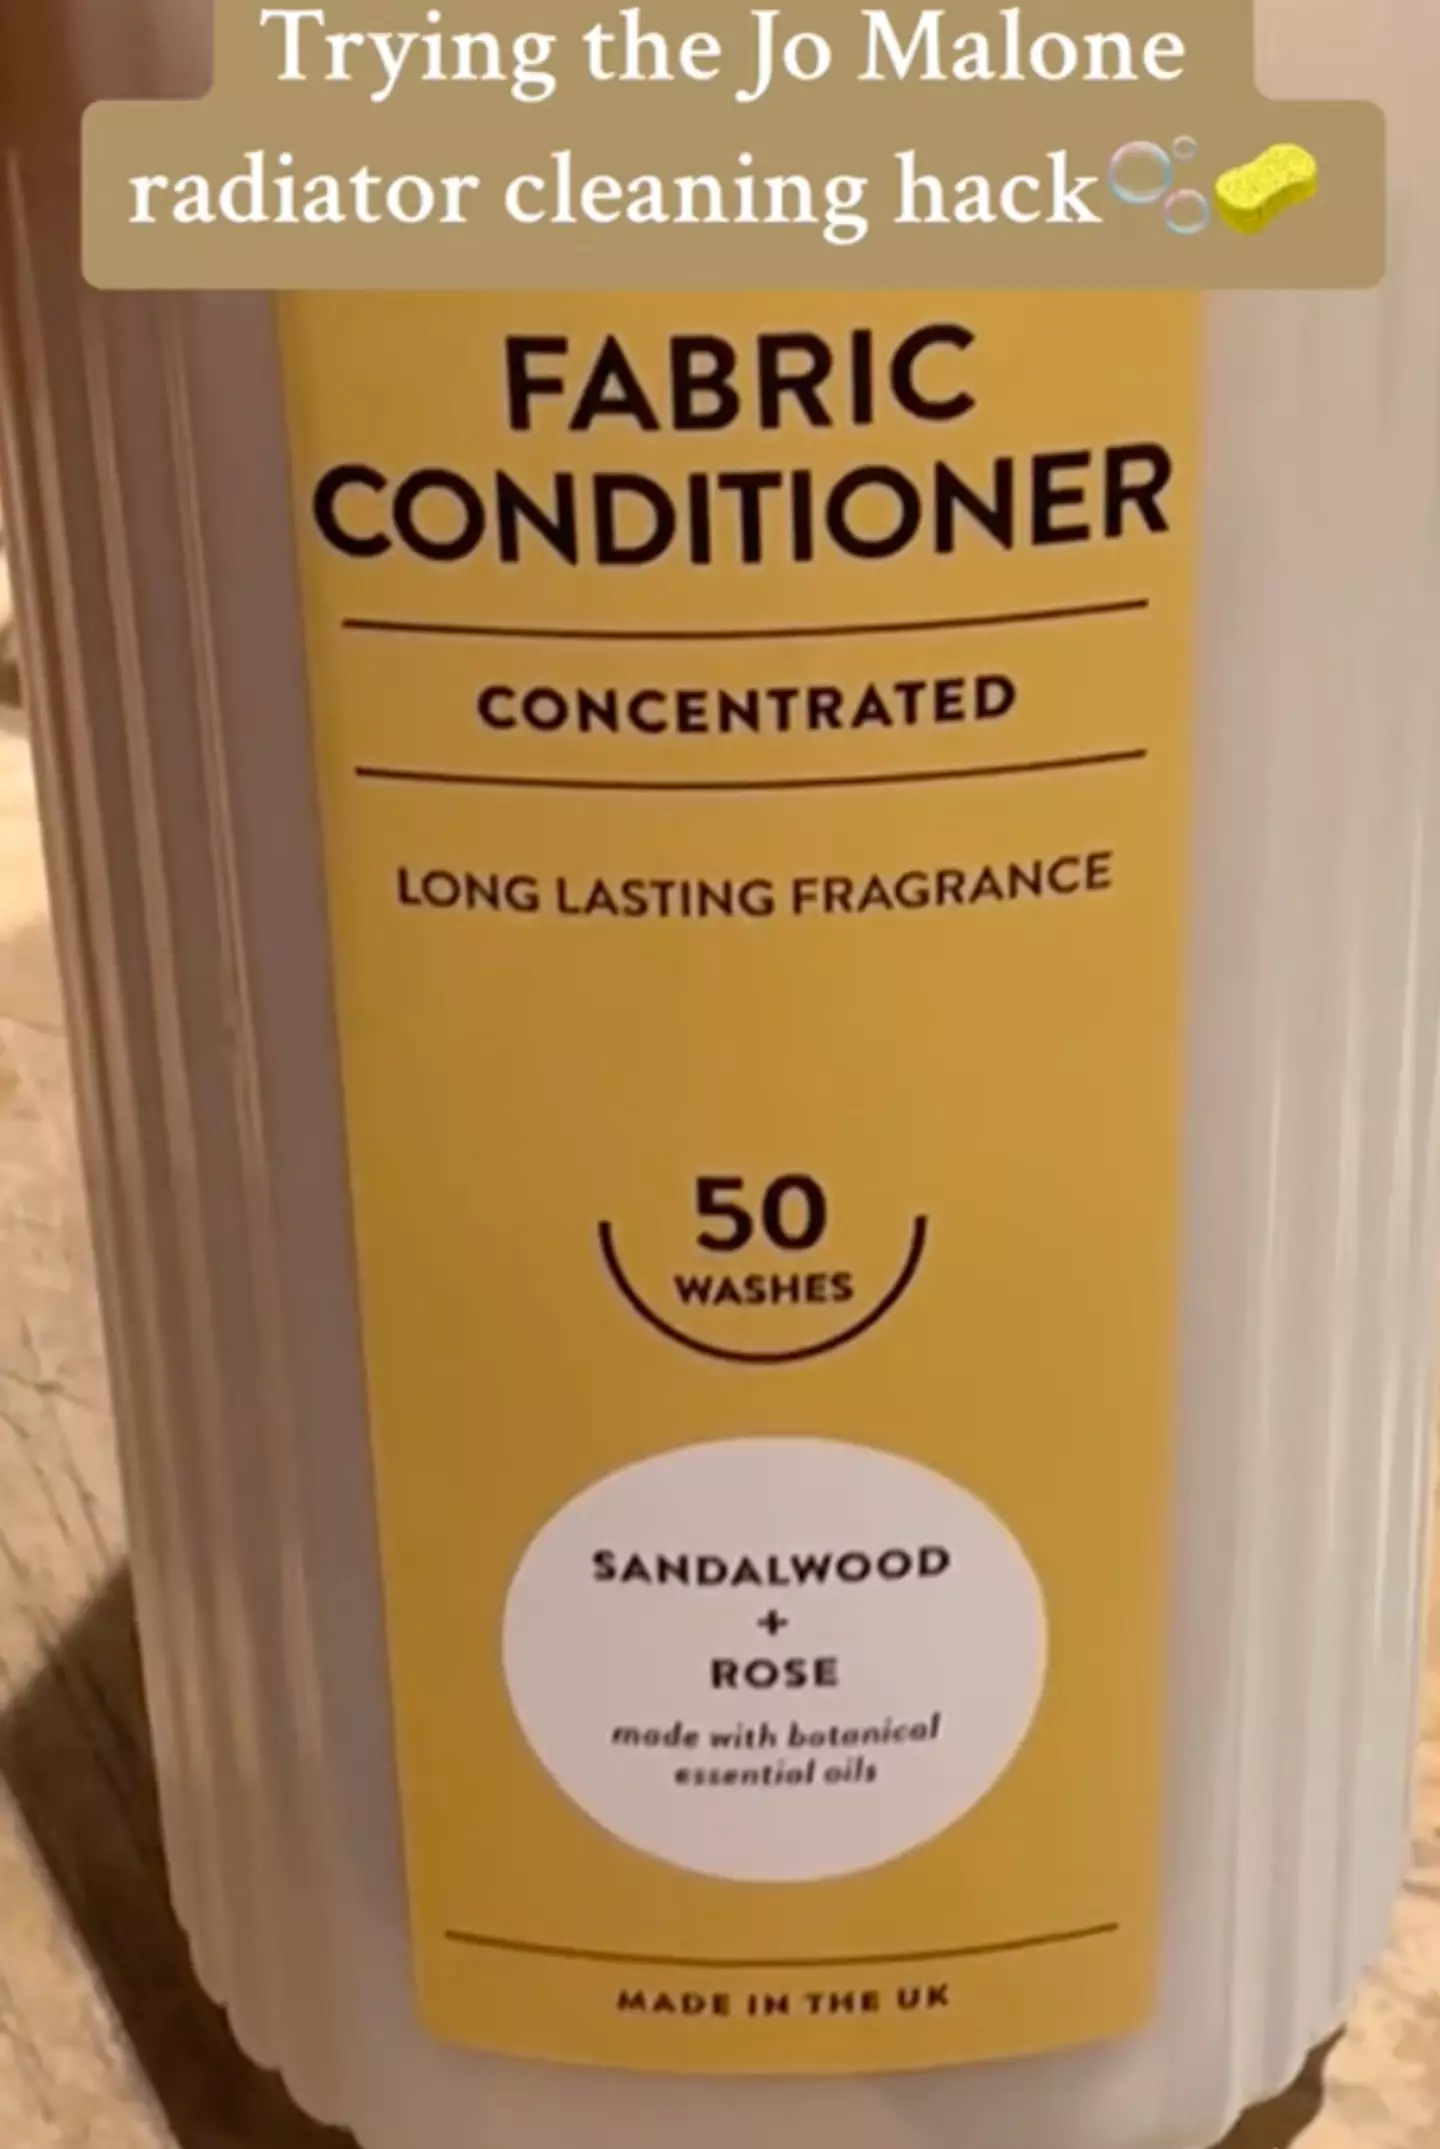 The TikToker uses Marks and Spencer sandalwood and rose fabric conditioner.